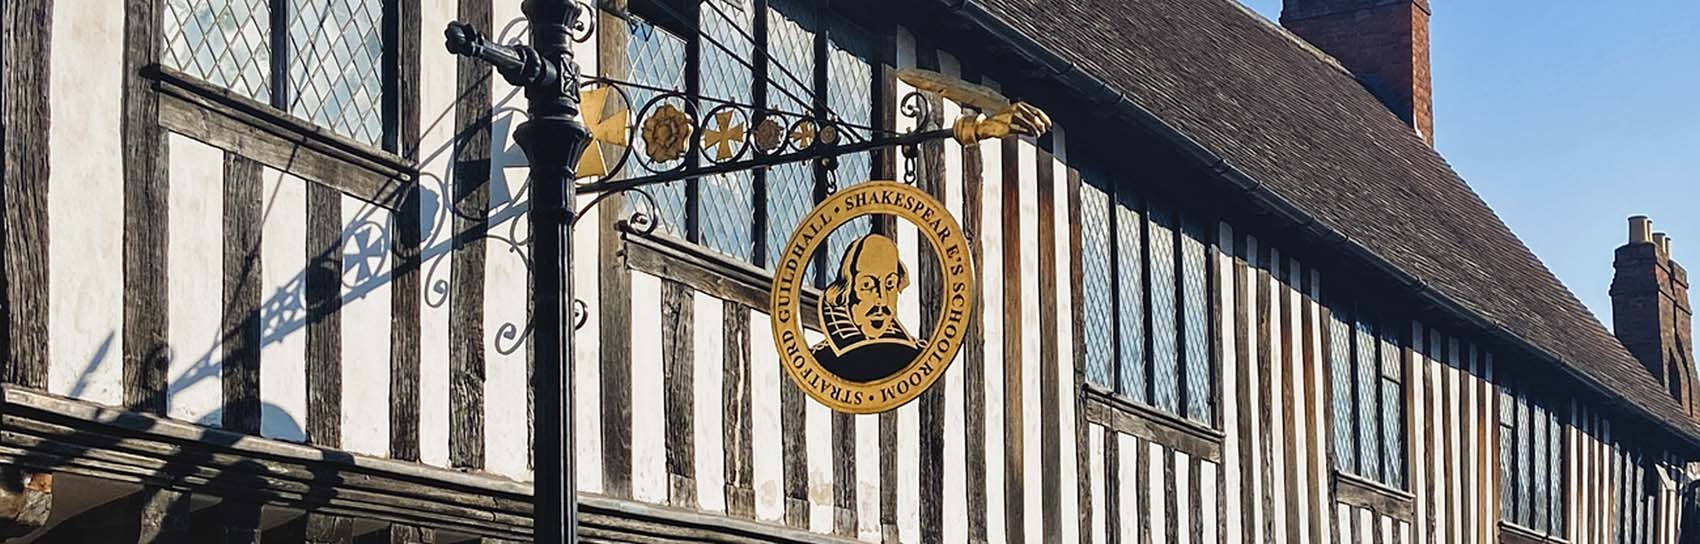 Shakespeare's school in Stratford-upon-Avon. Photograph by JAMIE EDWARDS